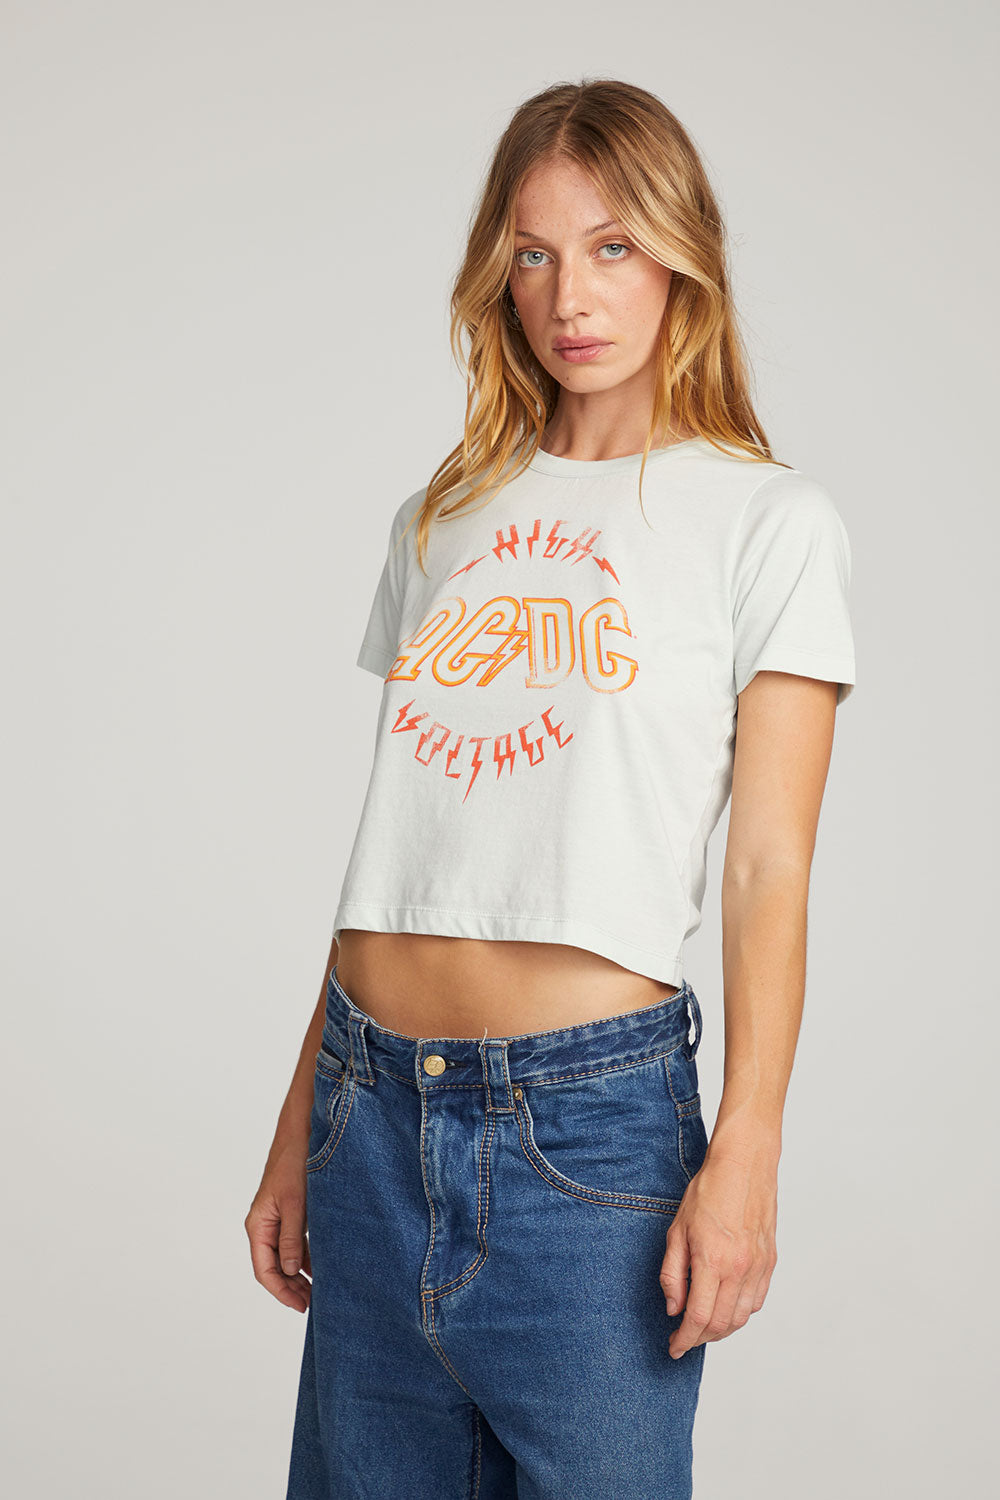 AC/DC High Voltage Tee WOMENS chaserbrand